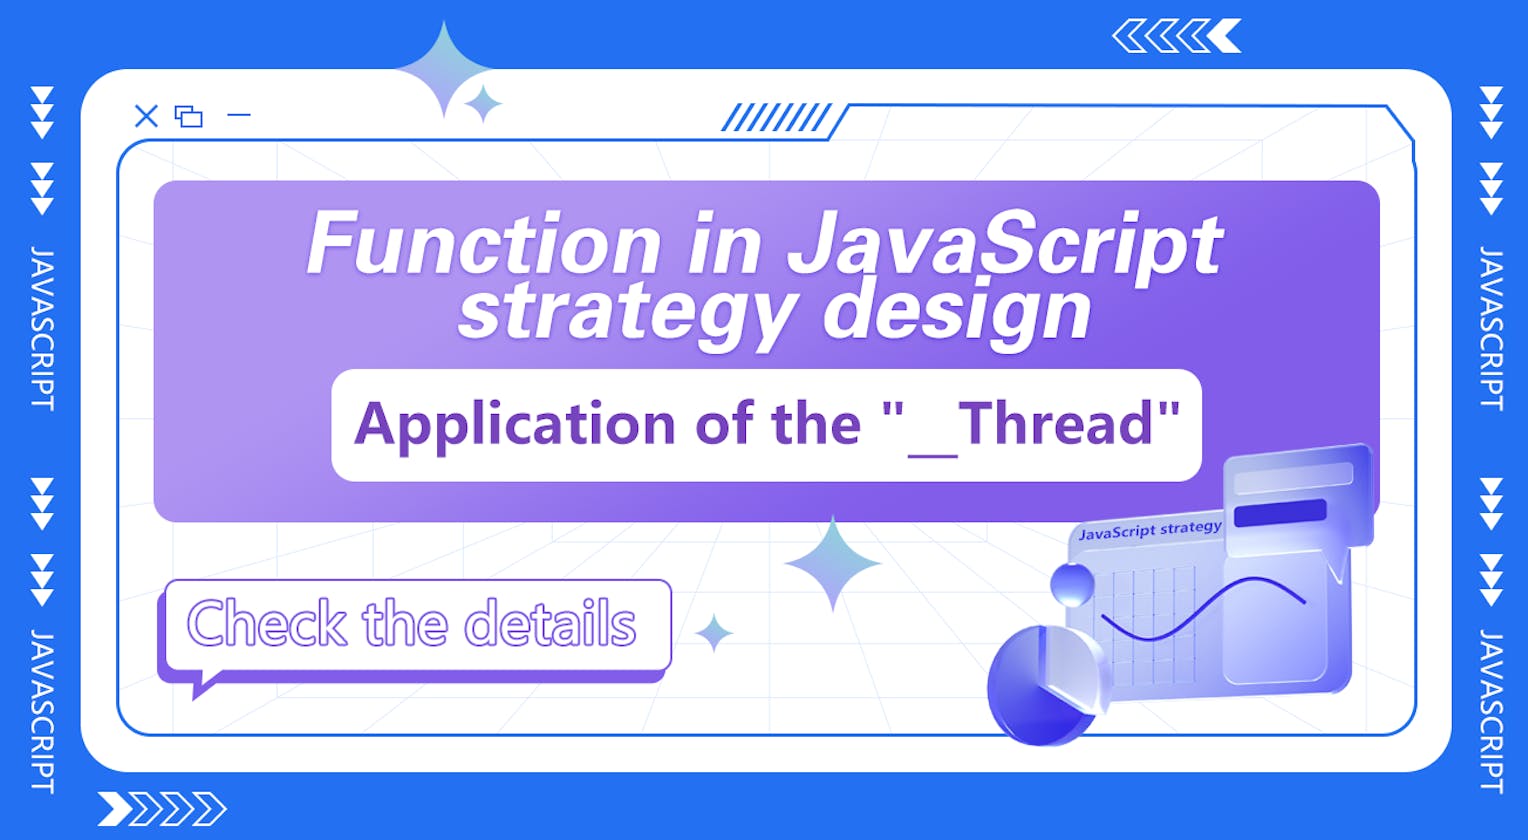 Application of the "__Thread" function in JavaScript strategy design